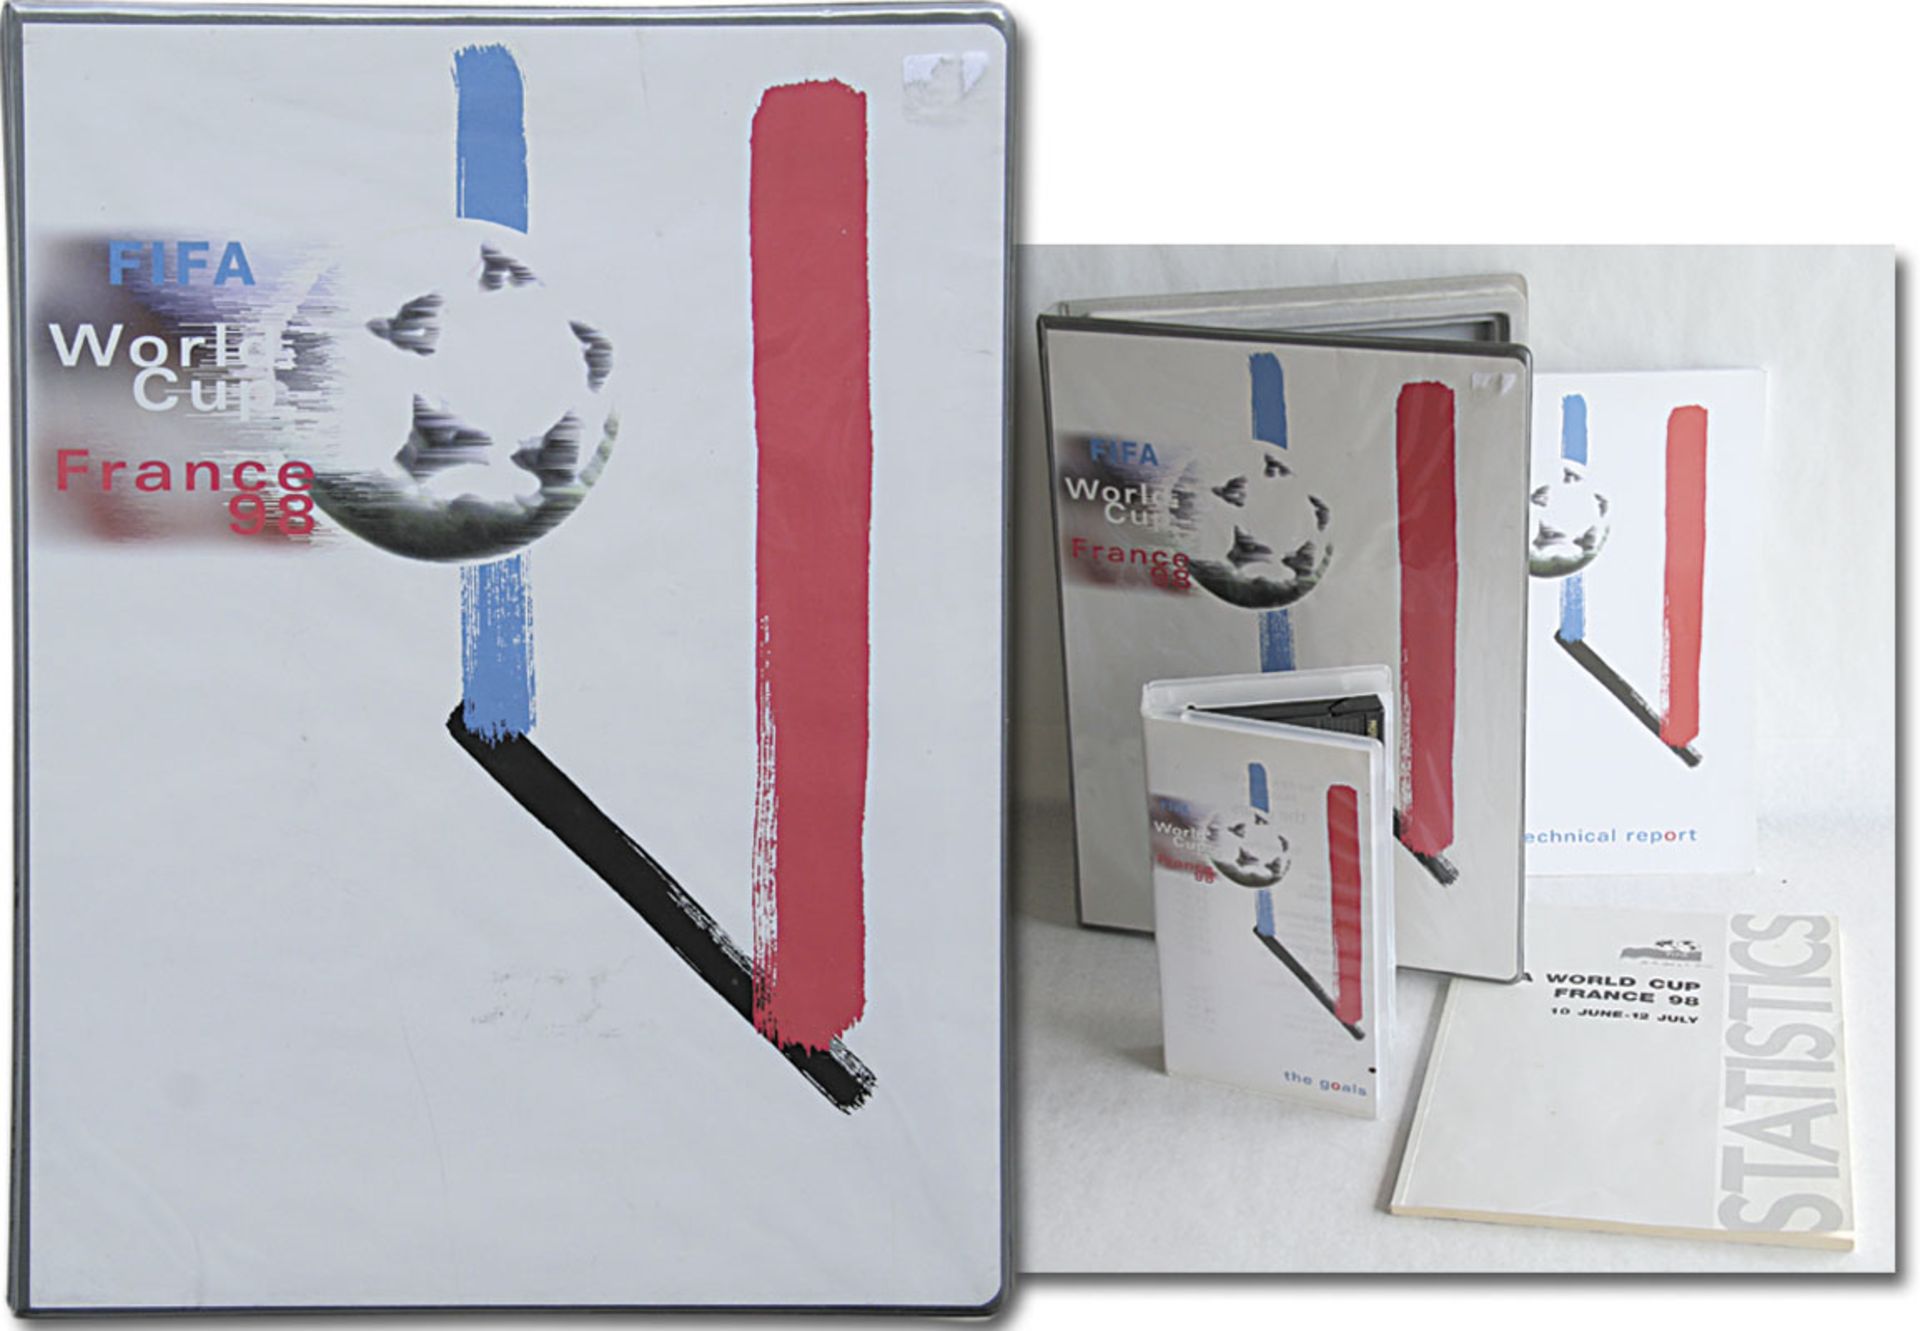 World Cup 1988 France. Official Report - 3 parts in original plastic case. 1. Technical Report, 21x2